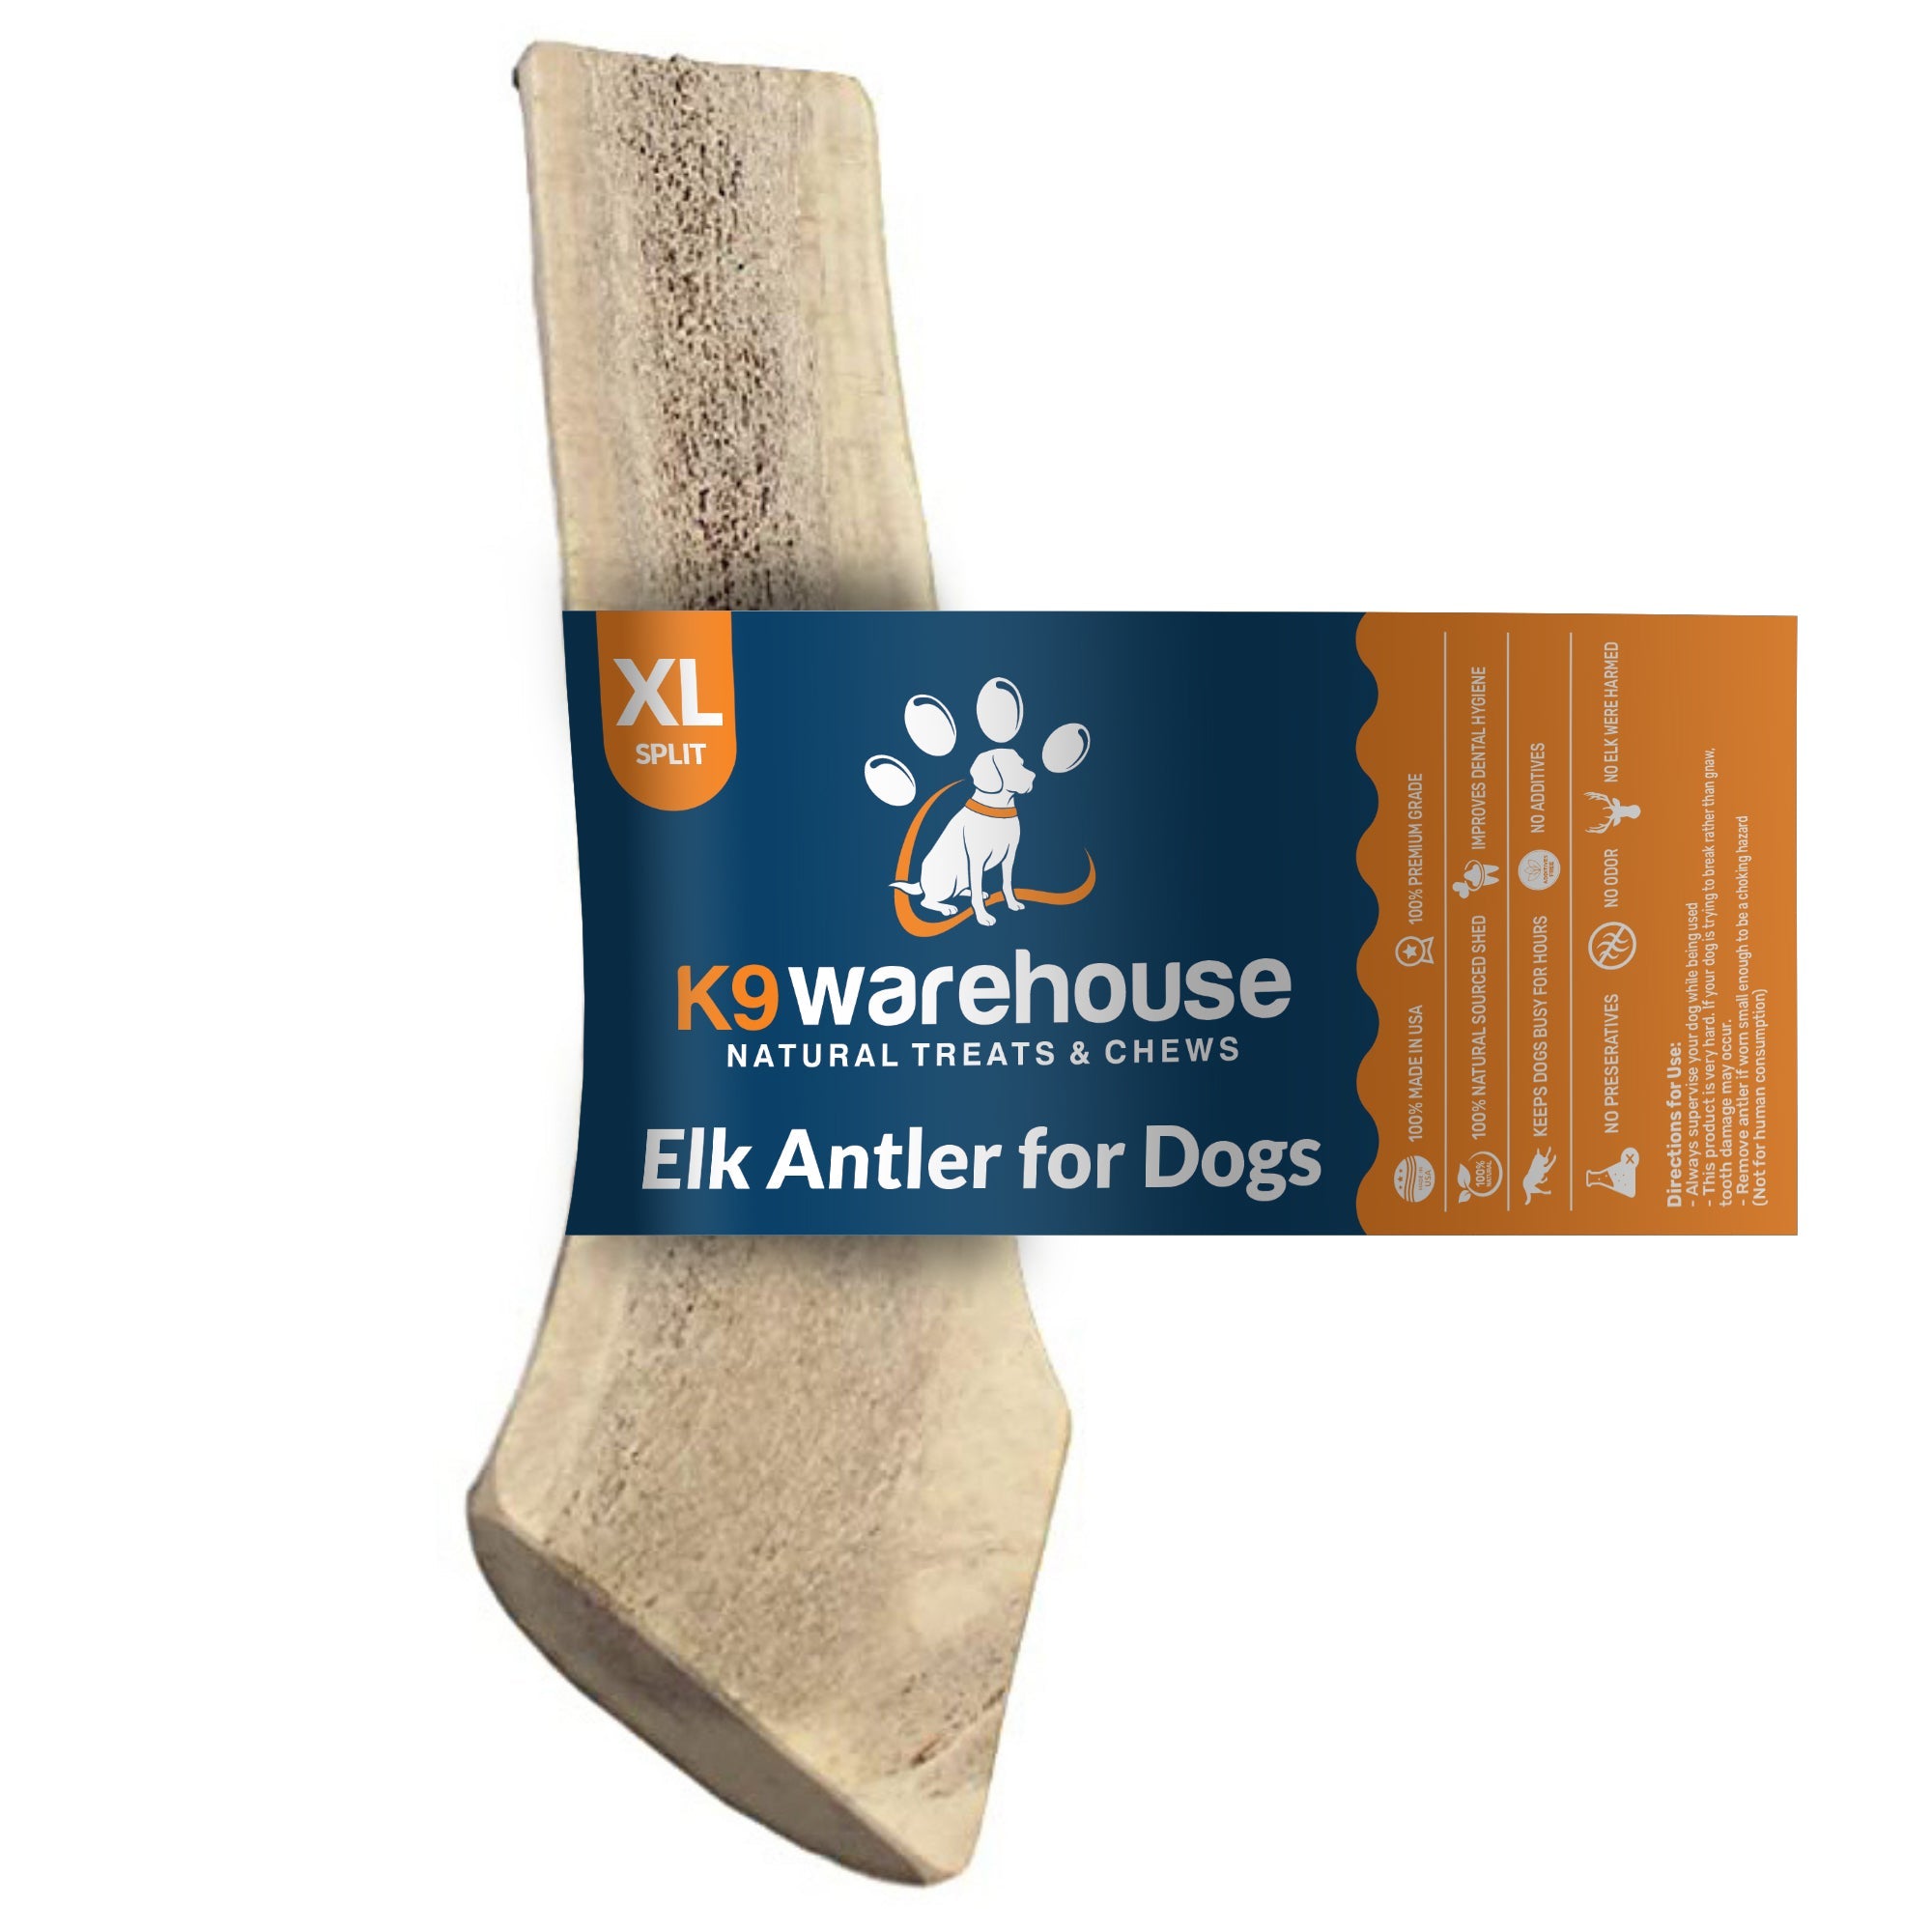 K9warehouse Elk Antlers For Dogs - Made in USA - Split and Whole - XL Split - K9warehouse.com